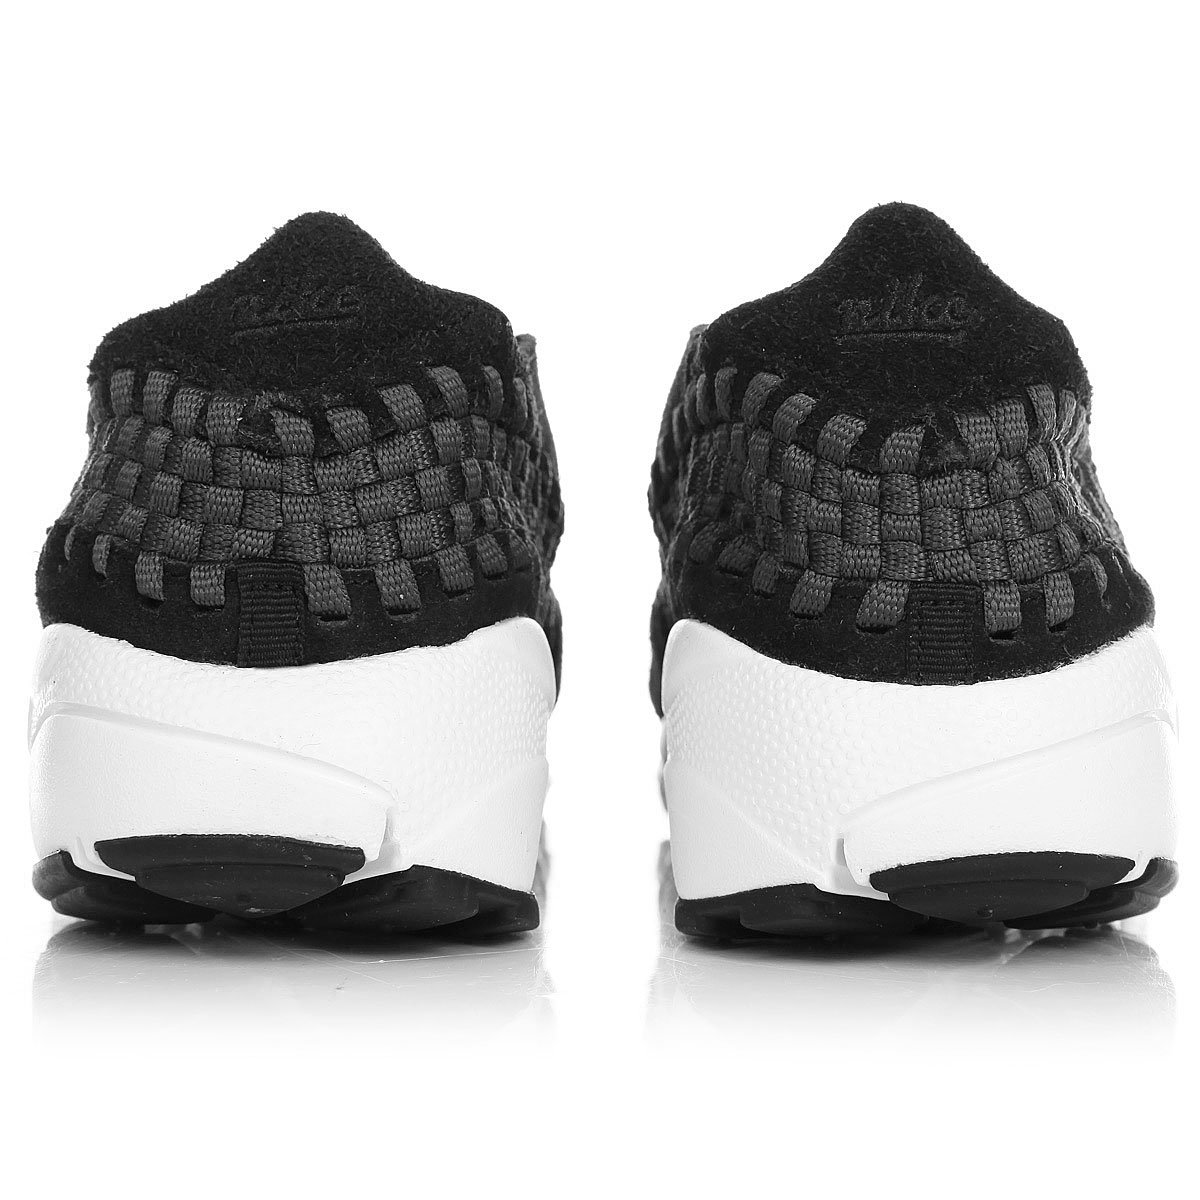 Кроссовки Nike Air Footscape Woven Nm Black